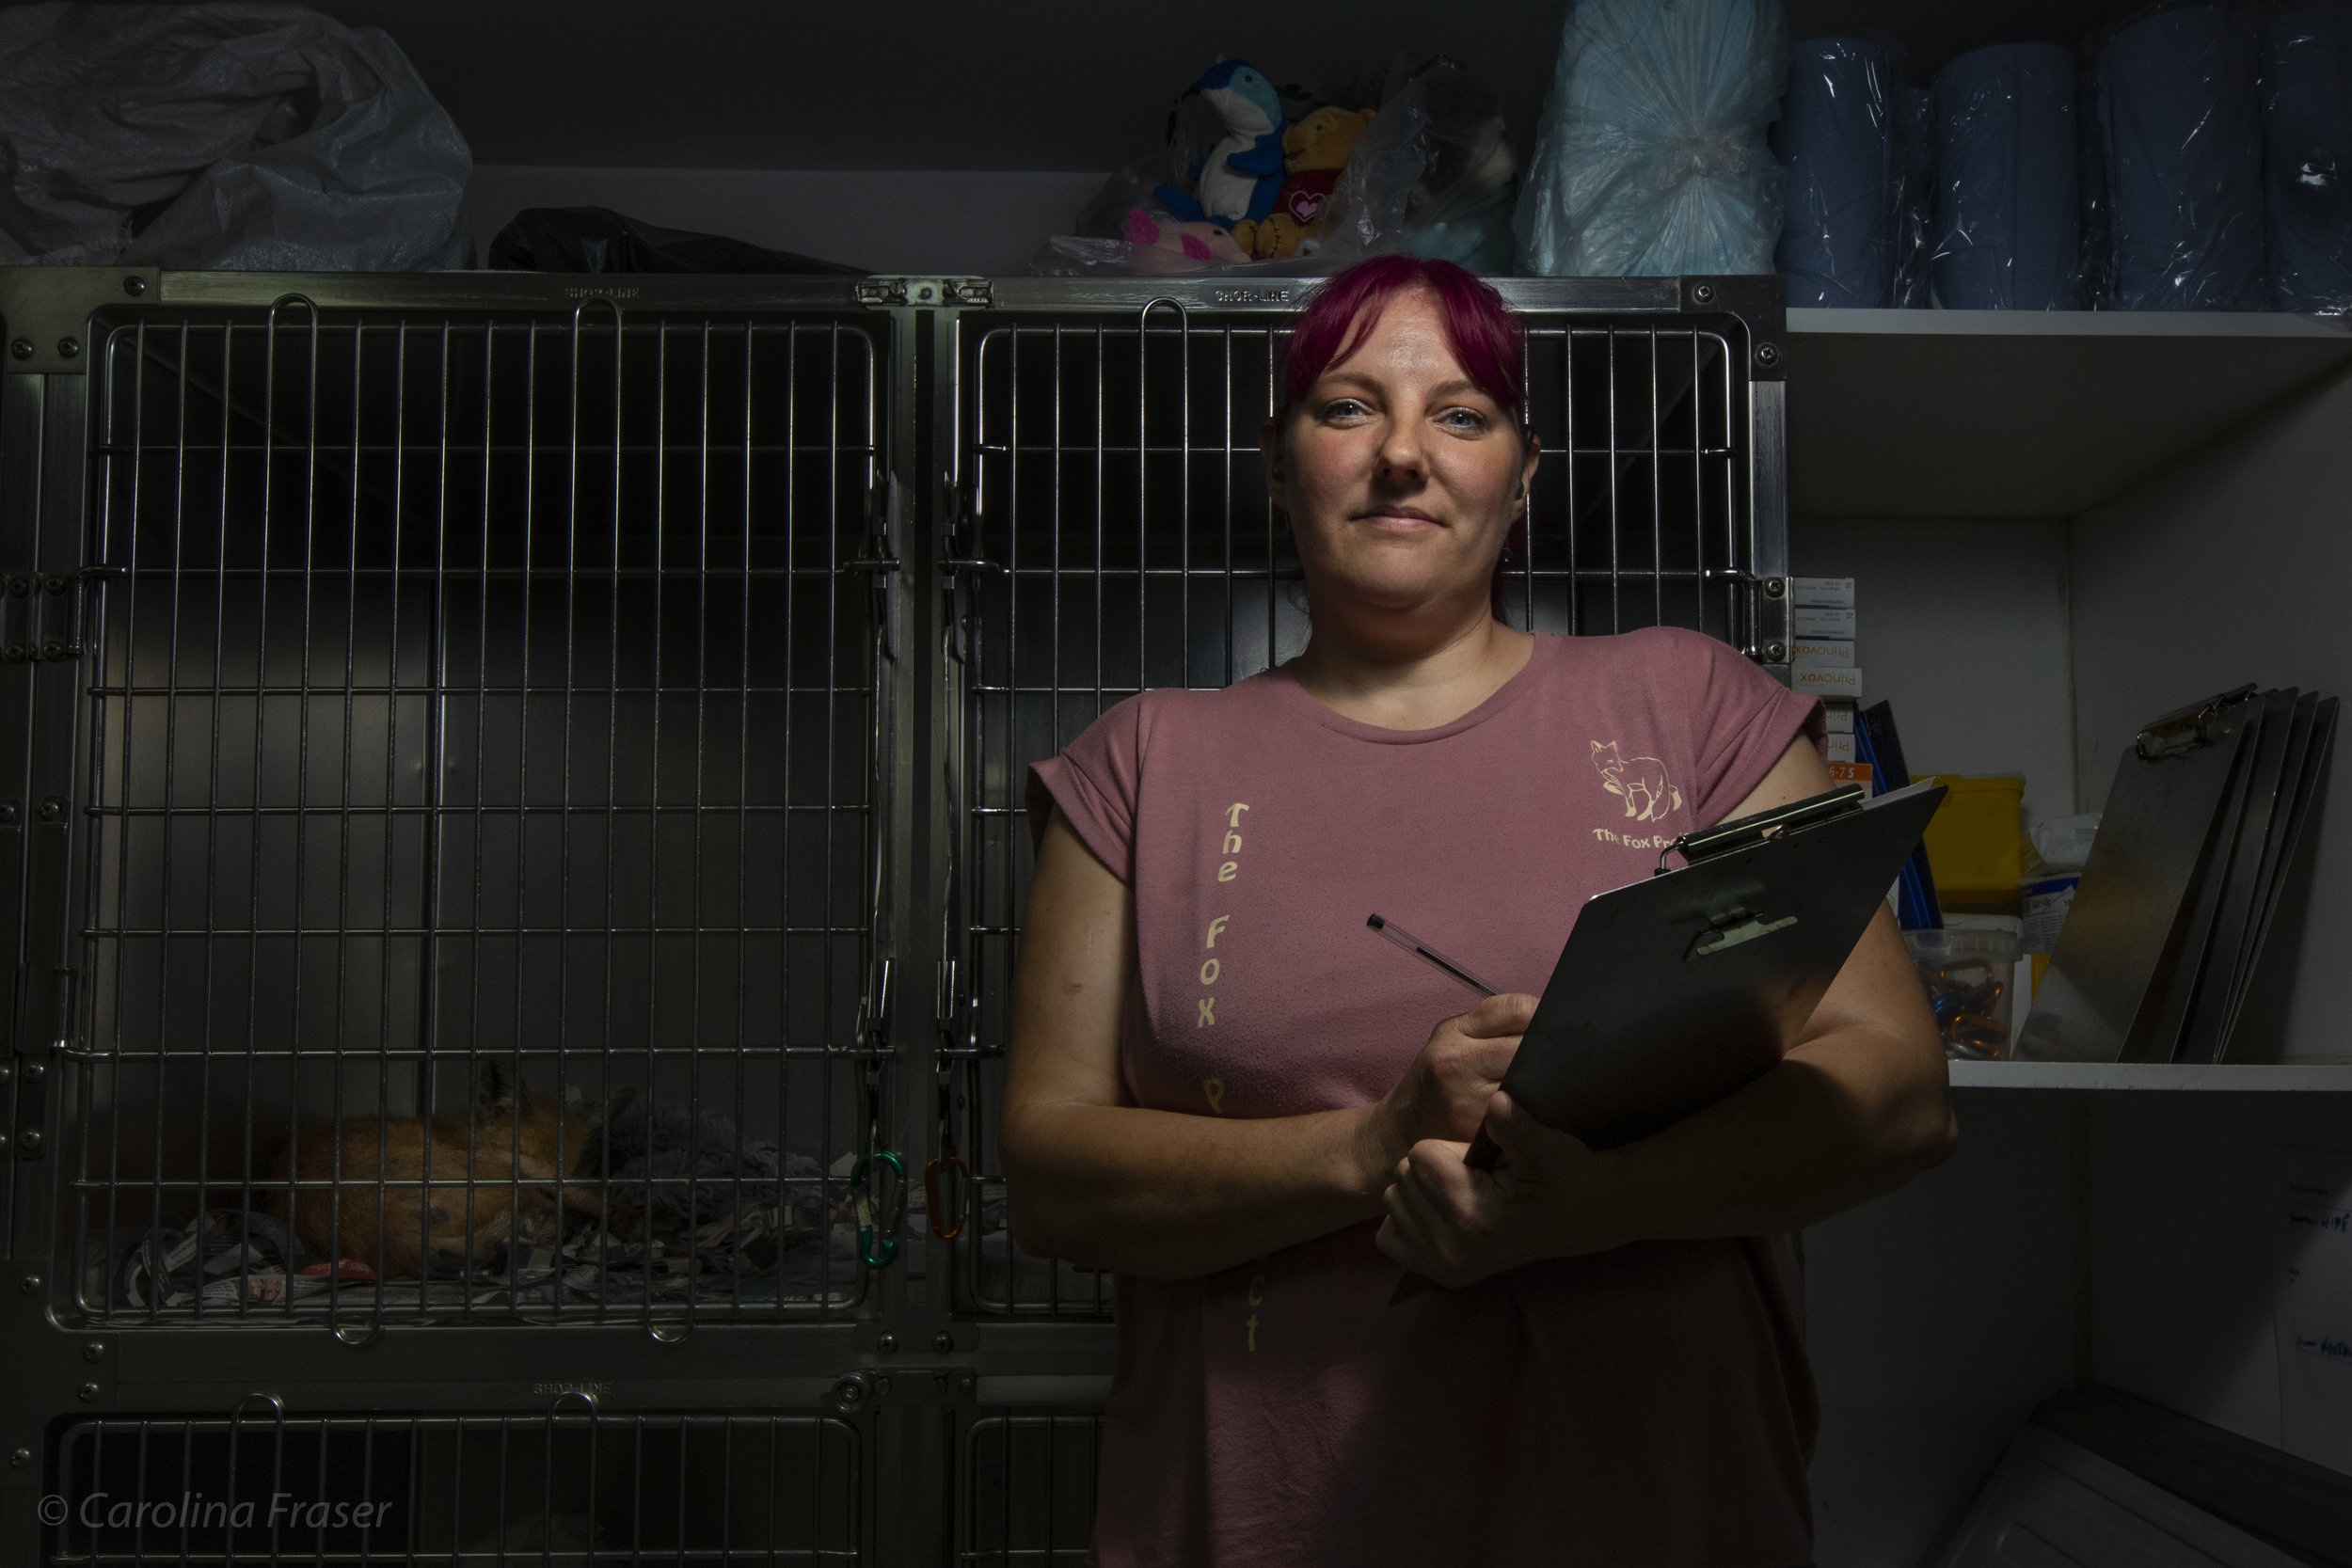  The Fox Project has two ambulances that are used to rescue and transport foxes. Taz Kenward is one of the ambulance drivers. She works with colleagues, volunteers and interns to treat around 800 foxes every year.    